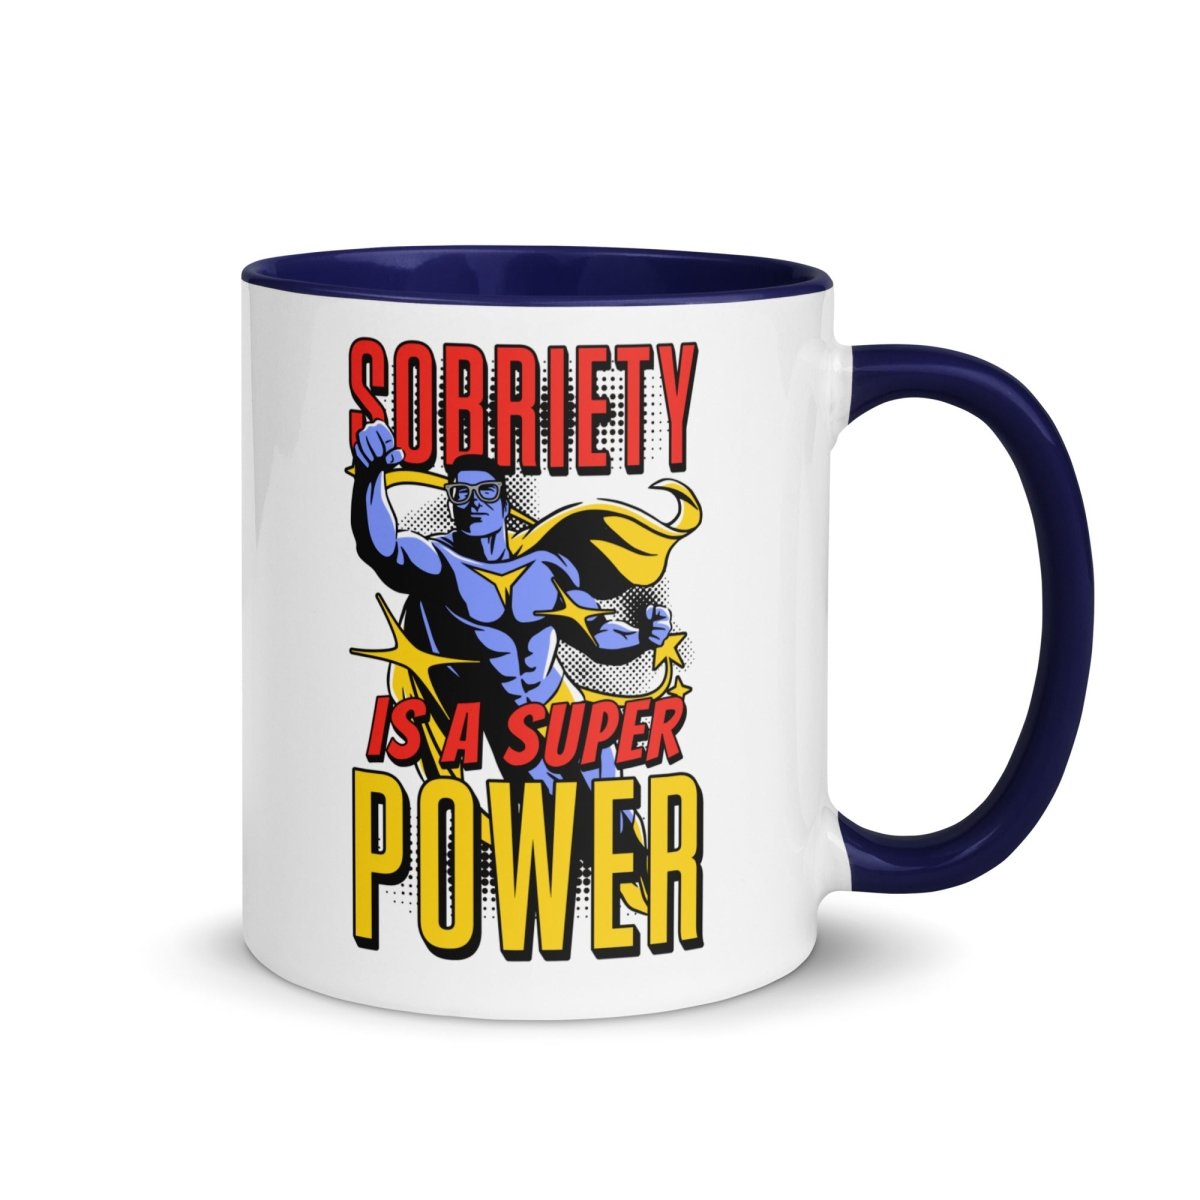 Sobriety Superpower Comic Mug with Color - Empower Your Day - Sobervation